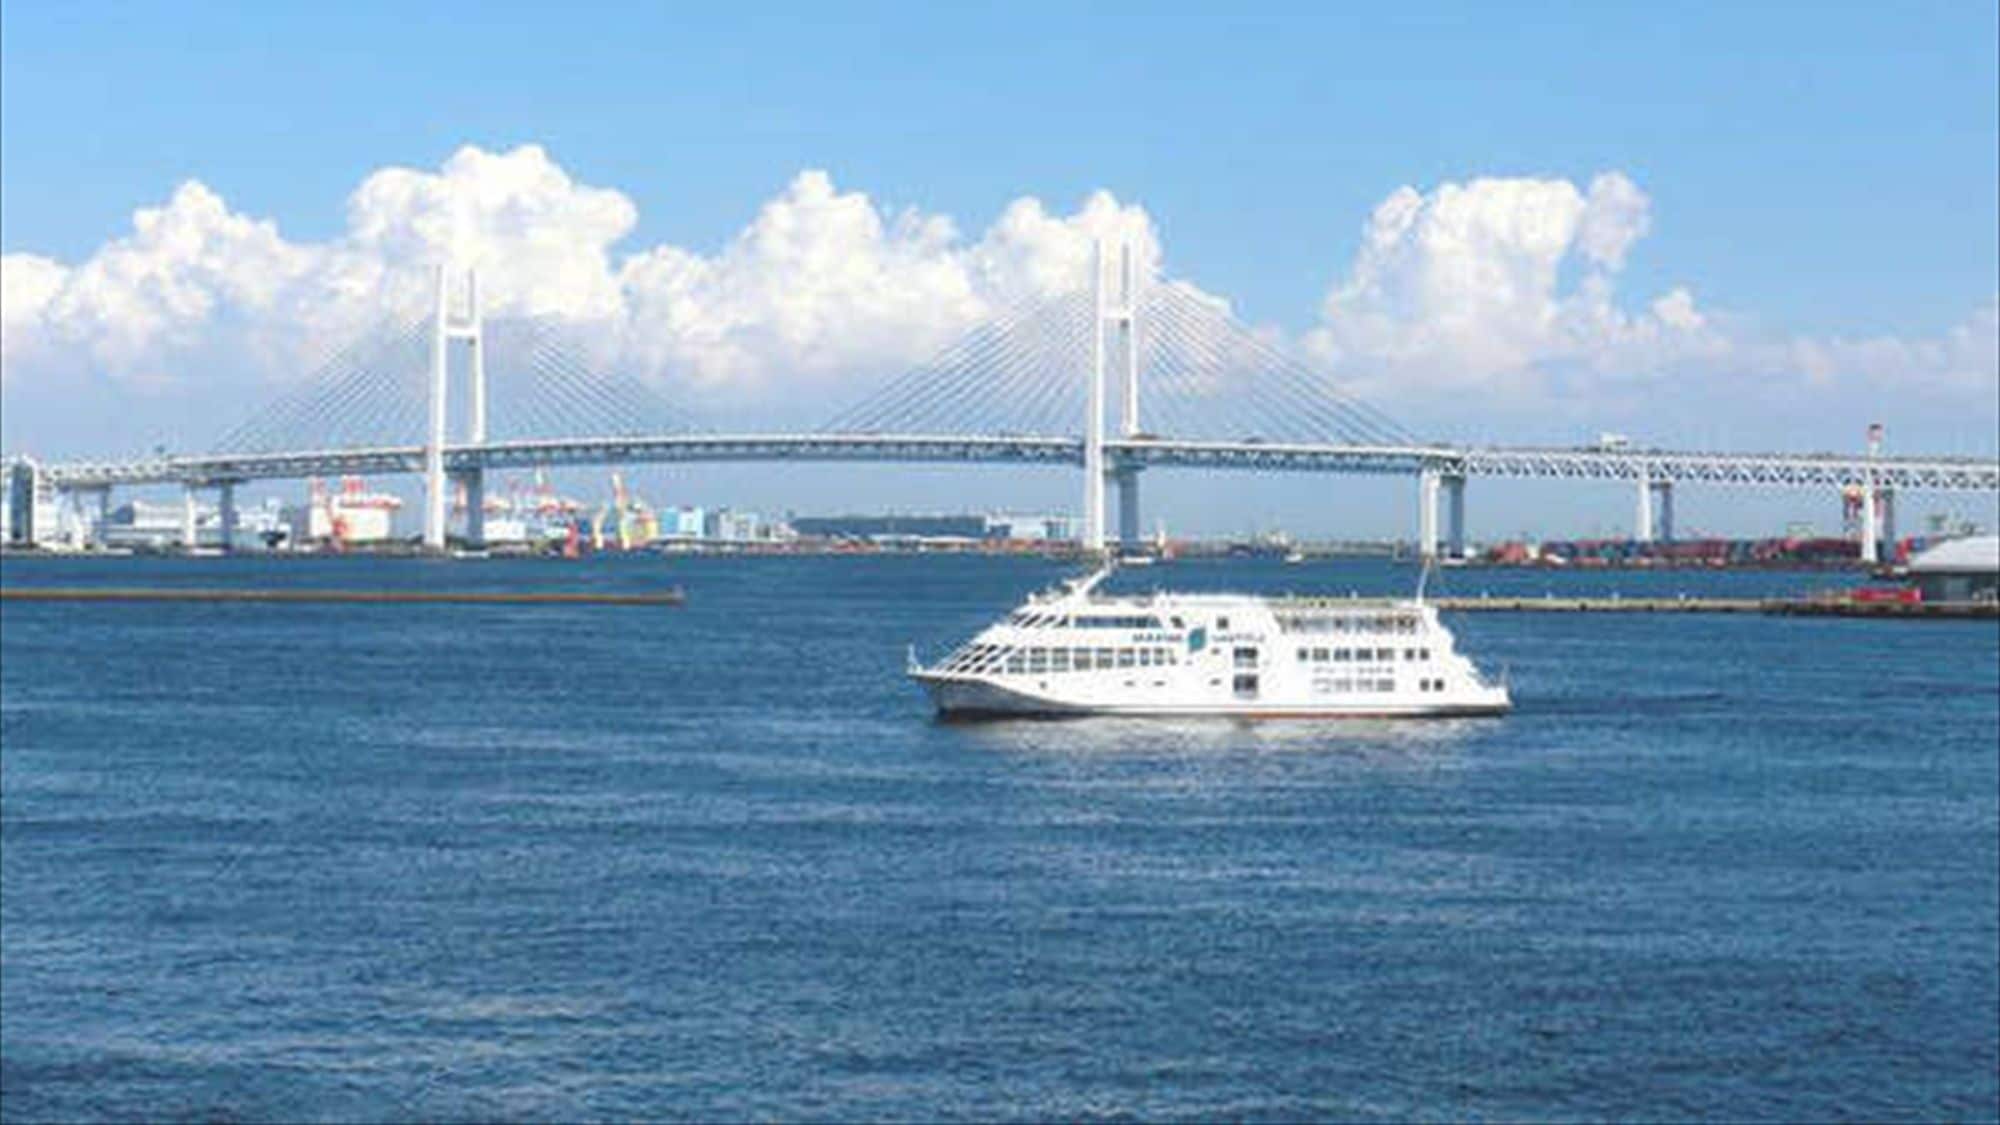 The proximity of the sea is also a unique attraction of Yokohama. It's Yokohama in the port city